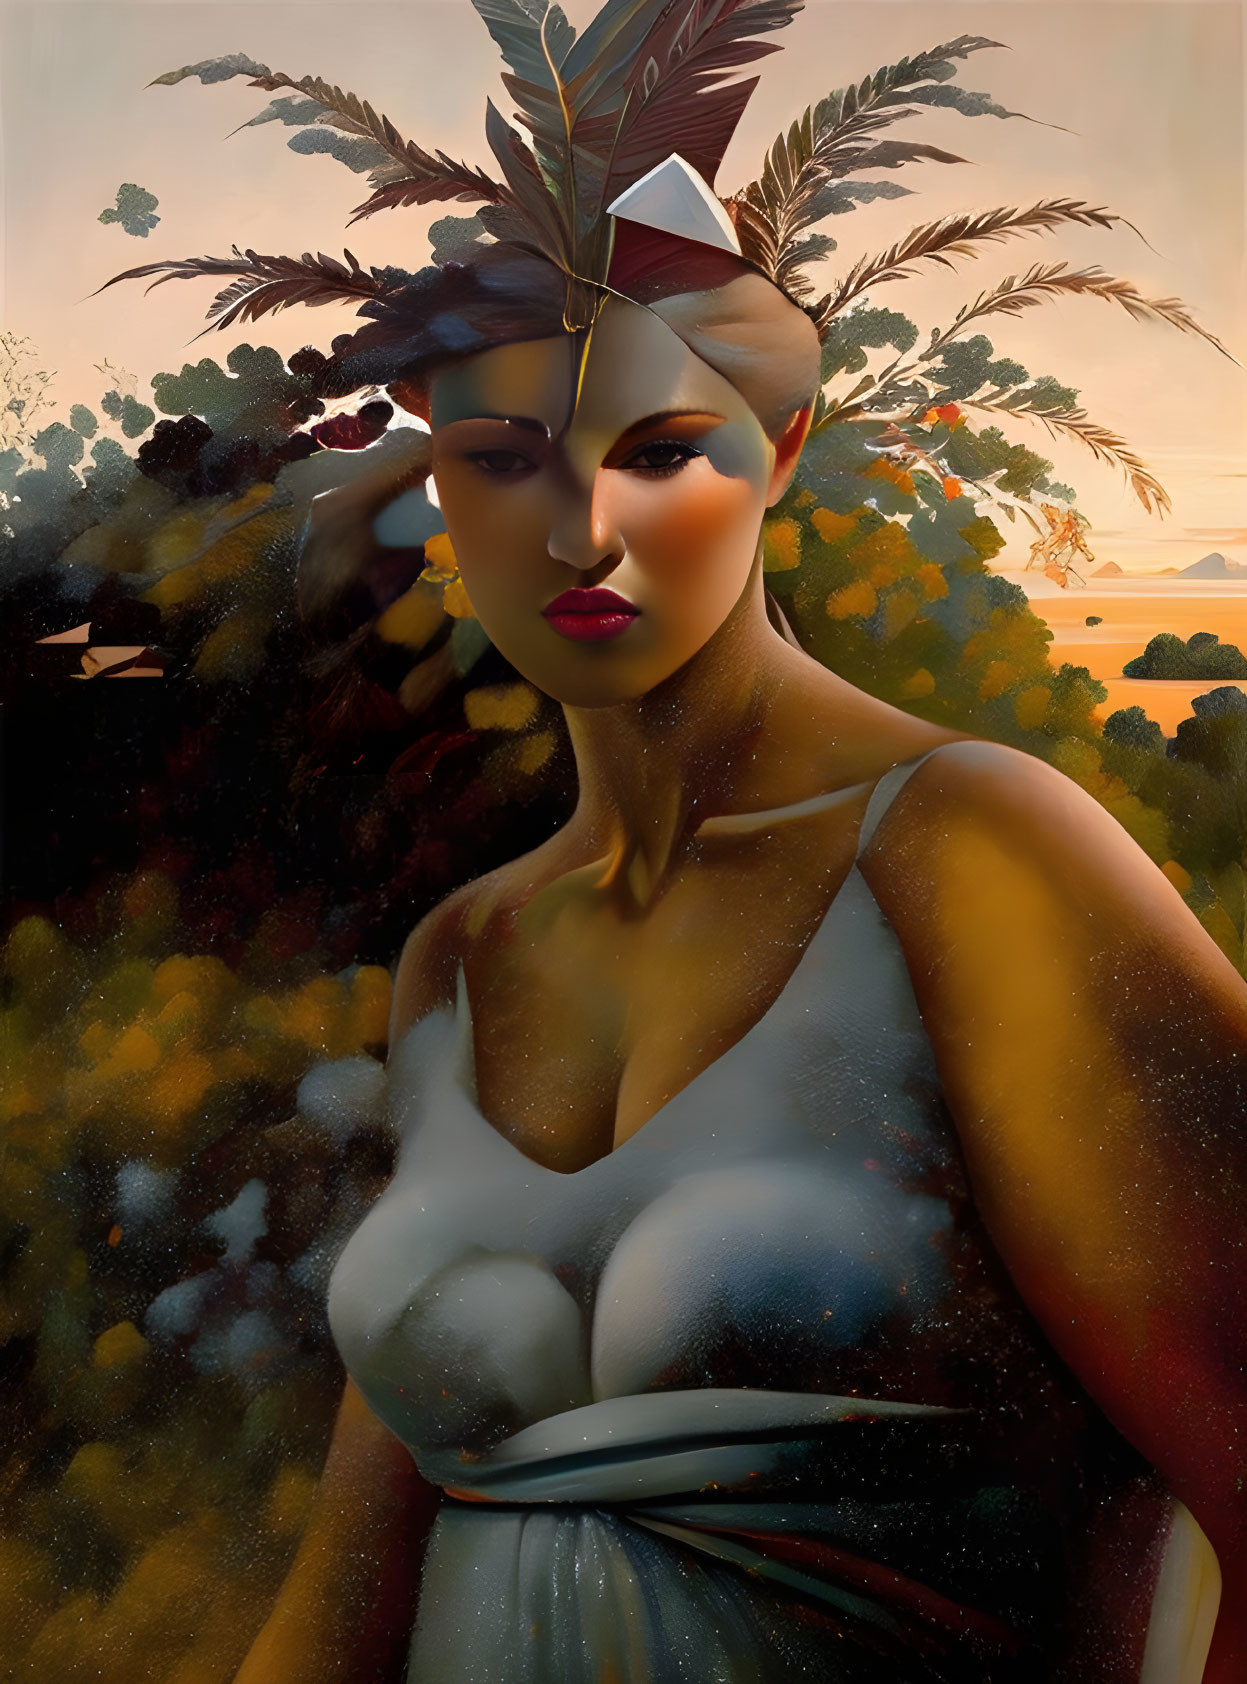 Surreal portrait of woman with feathered headpiece and golden skin